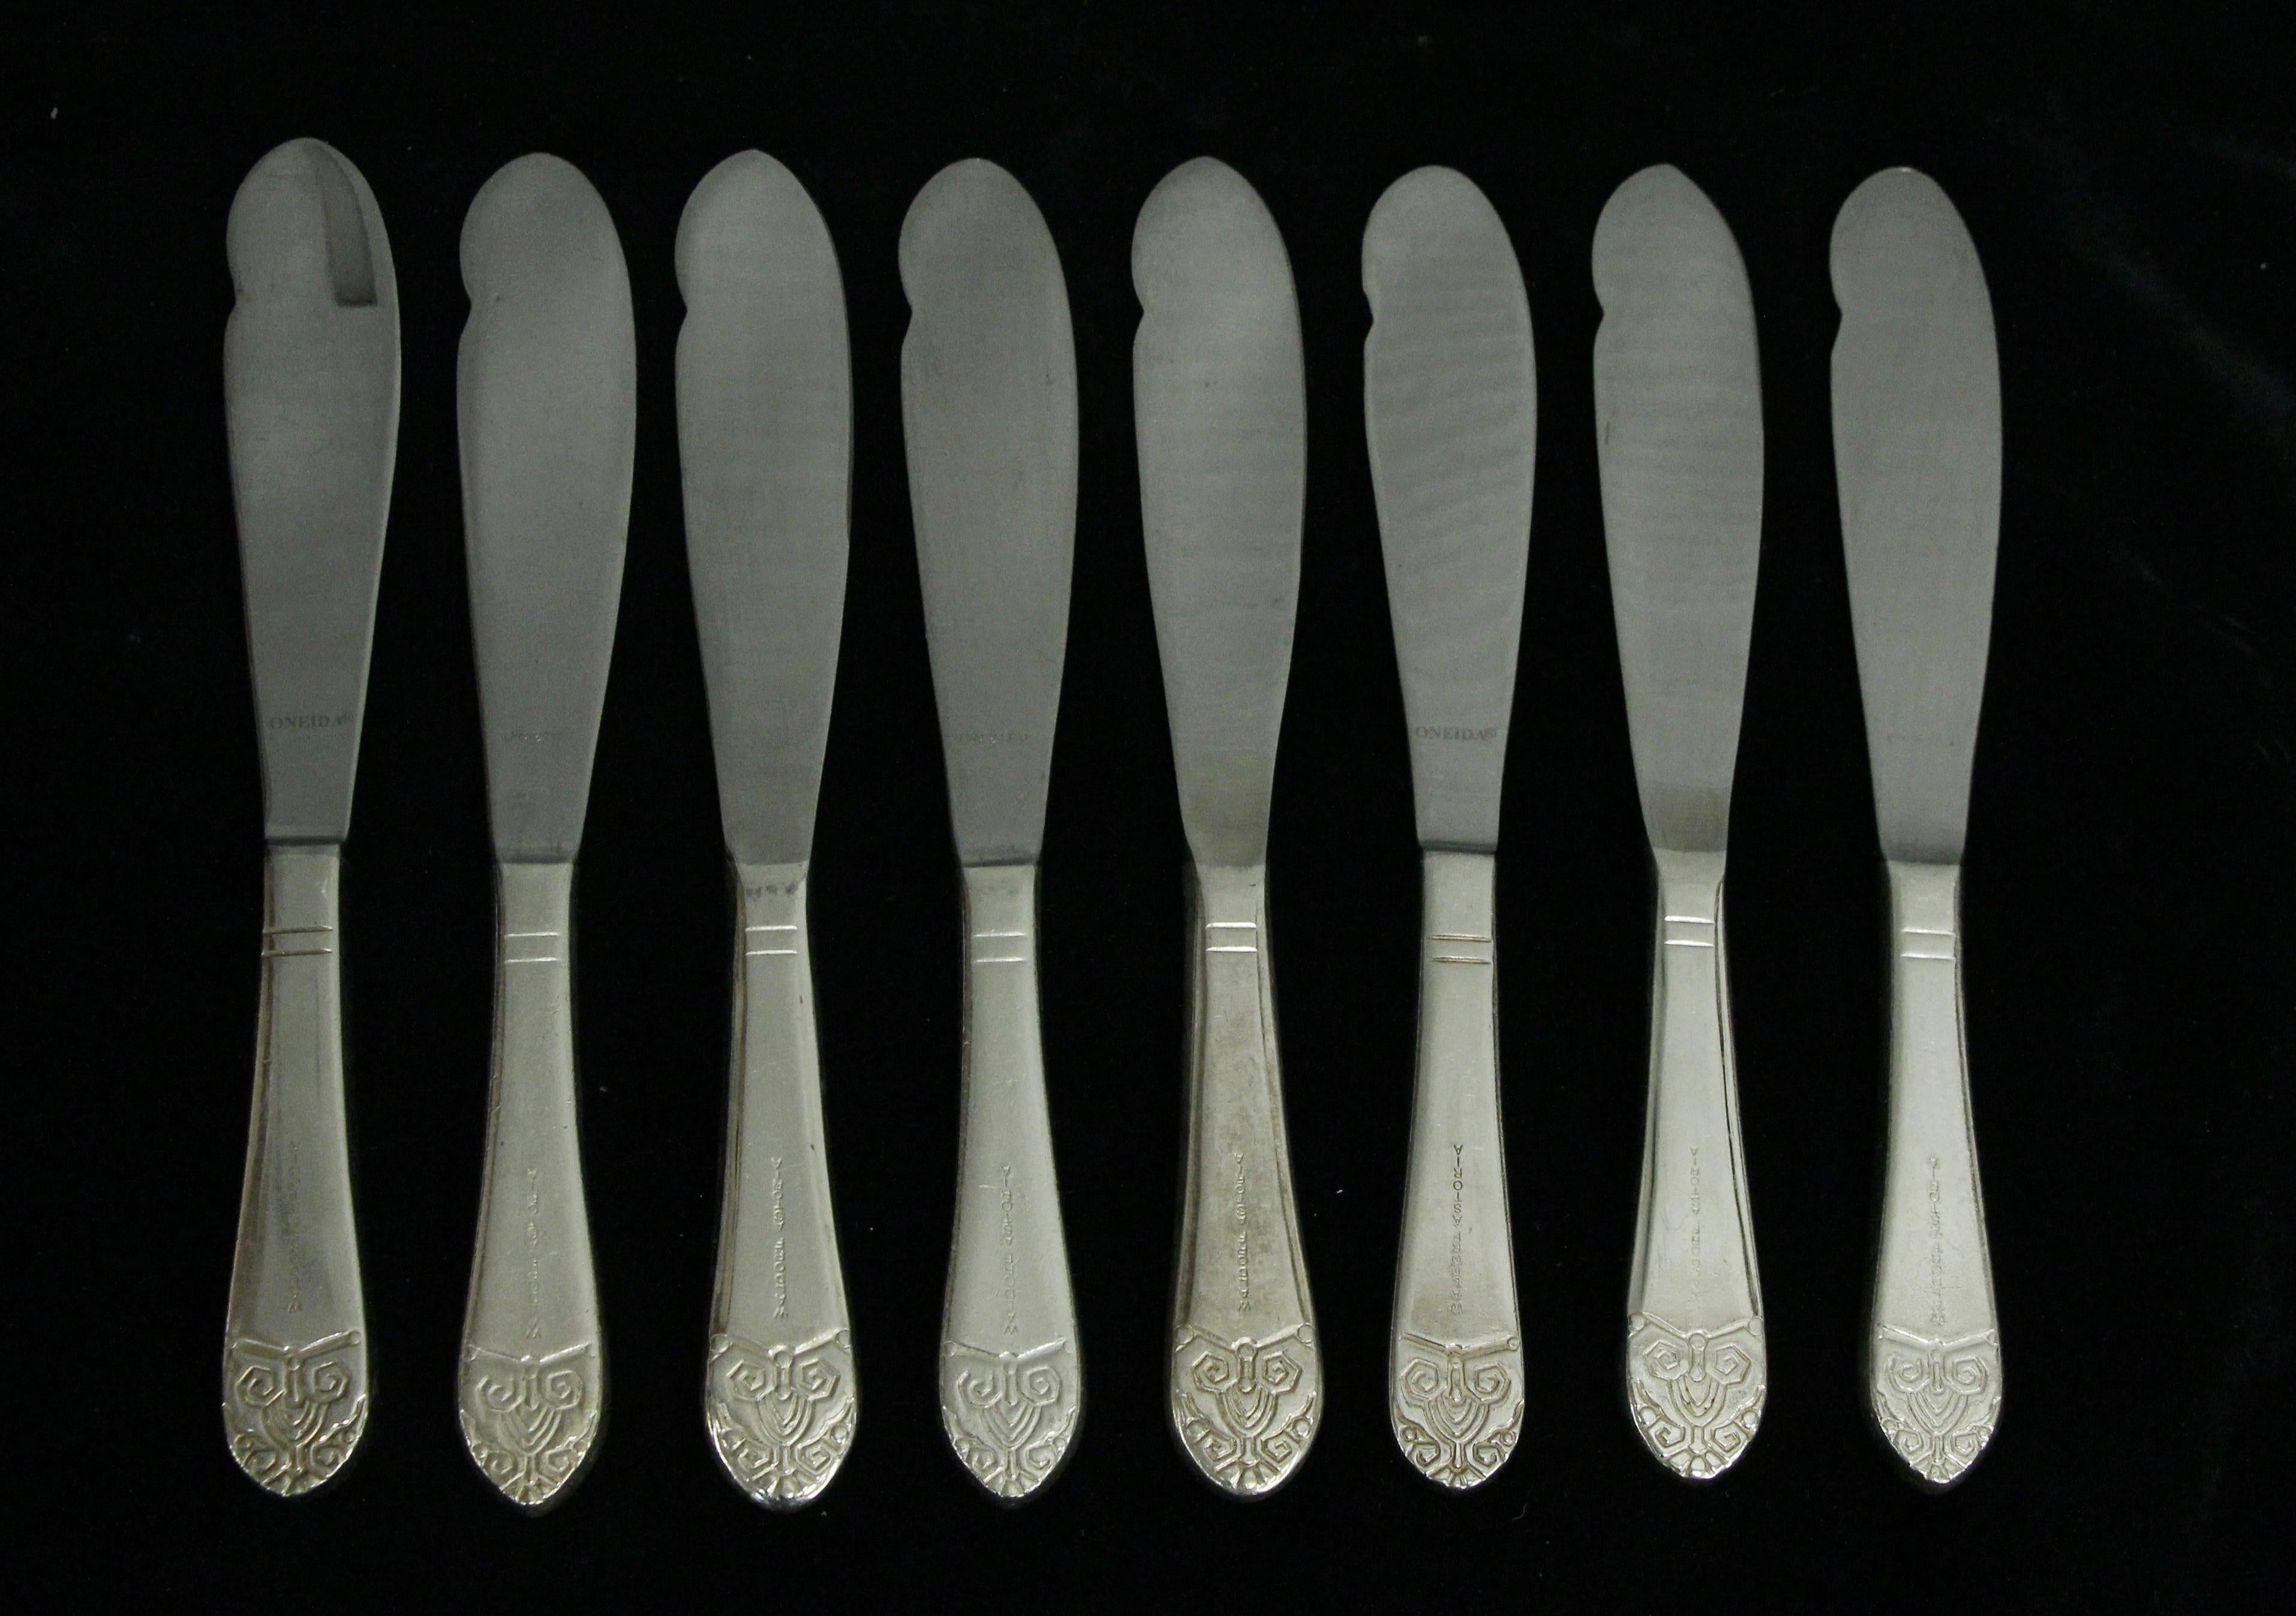 Silver plated steel eight piece used fish knife set. Made by Oneida. This item is original to the NYC Waldorf Astoria Hotel Towers. 1980s. Some are stamped 